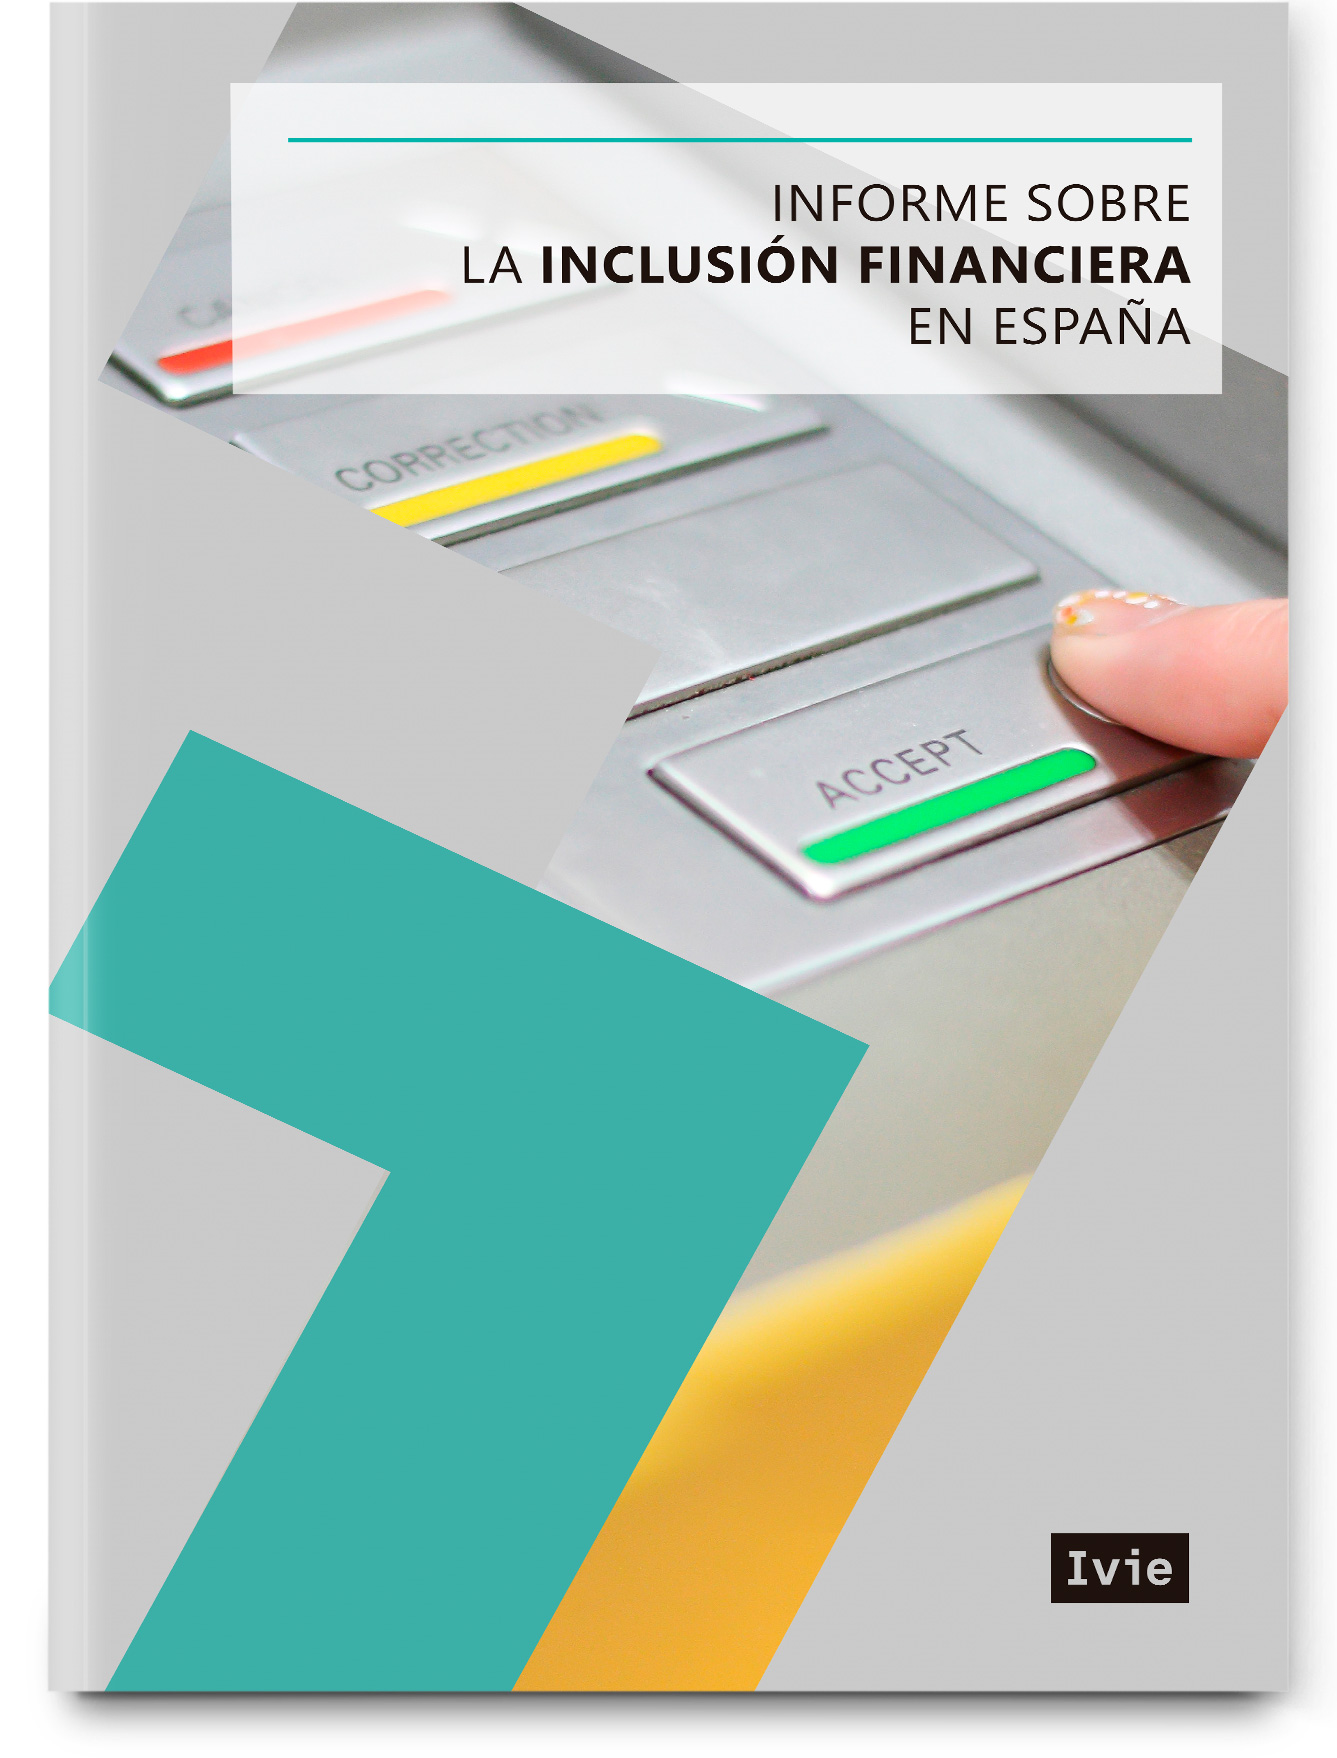 Report on financial inclusion in Spain